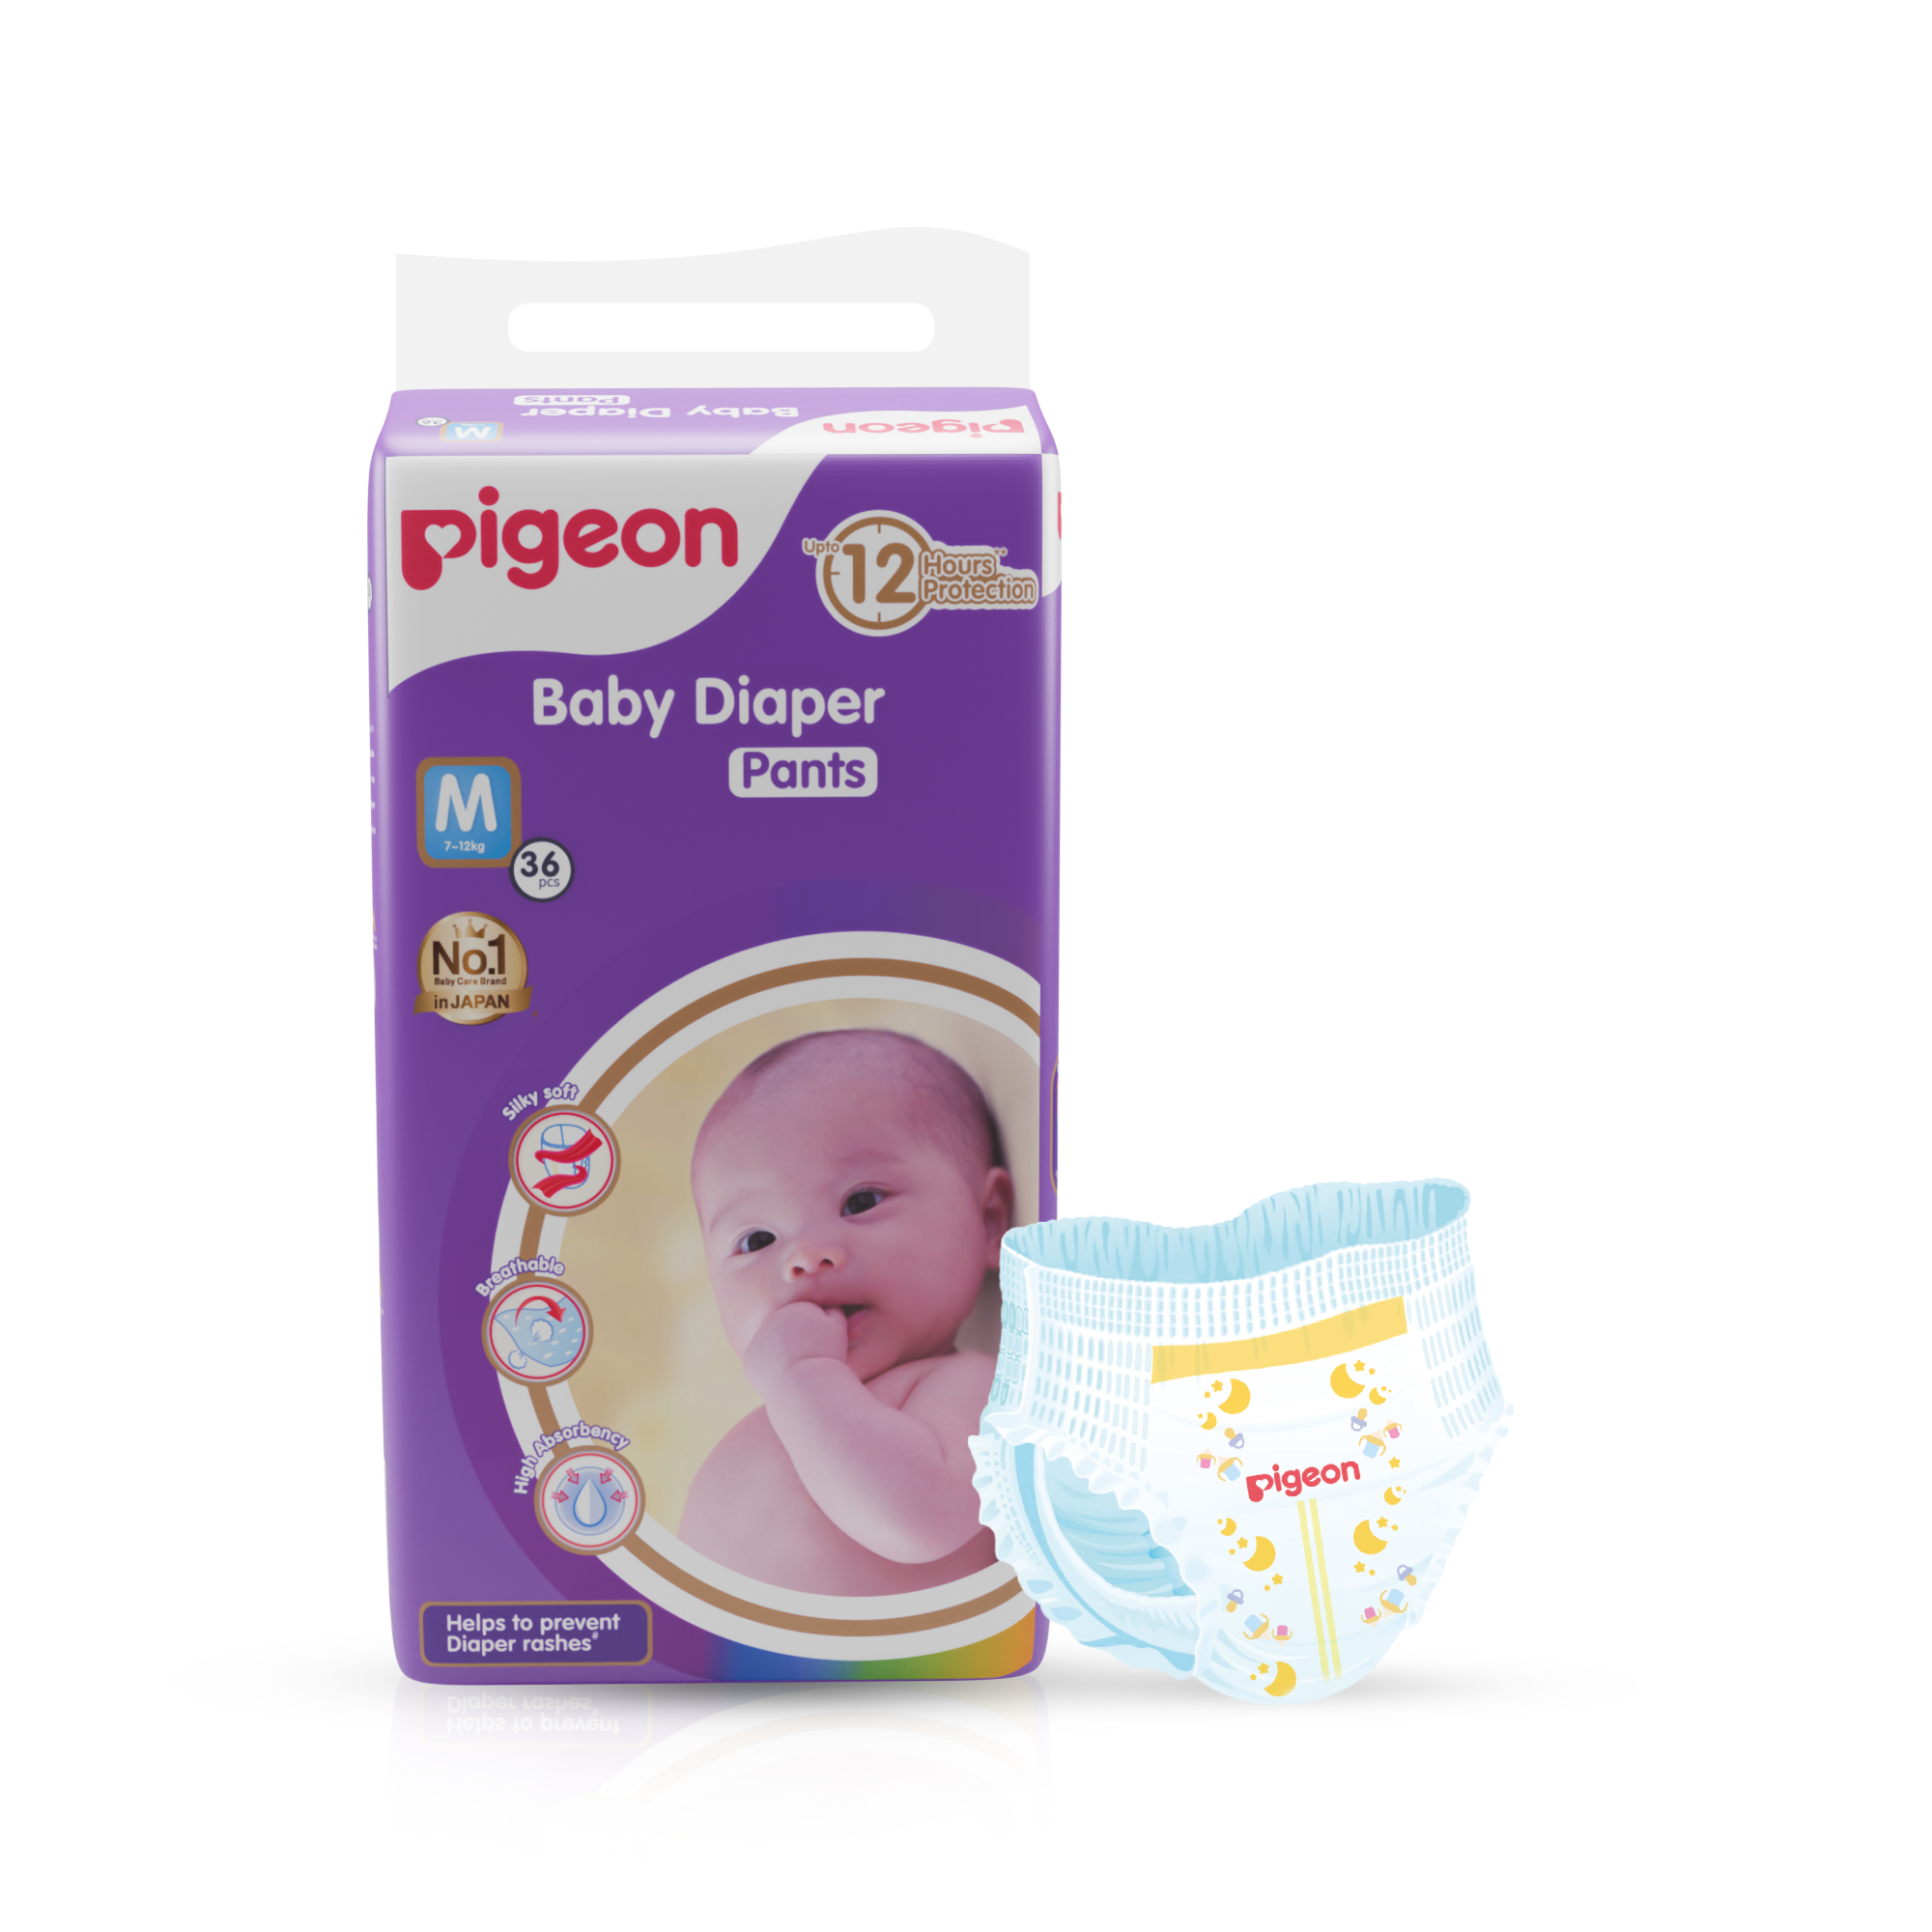 SMC Smile Baby Diaper Pants M (7-12 kg) - Online Grocery Shopping and  Delivery in Bangladesh | Buy fresh food items, personal care, baby products  and more